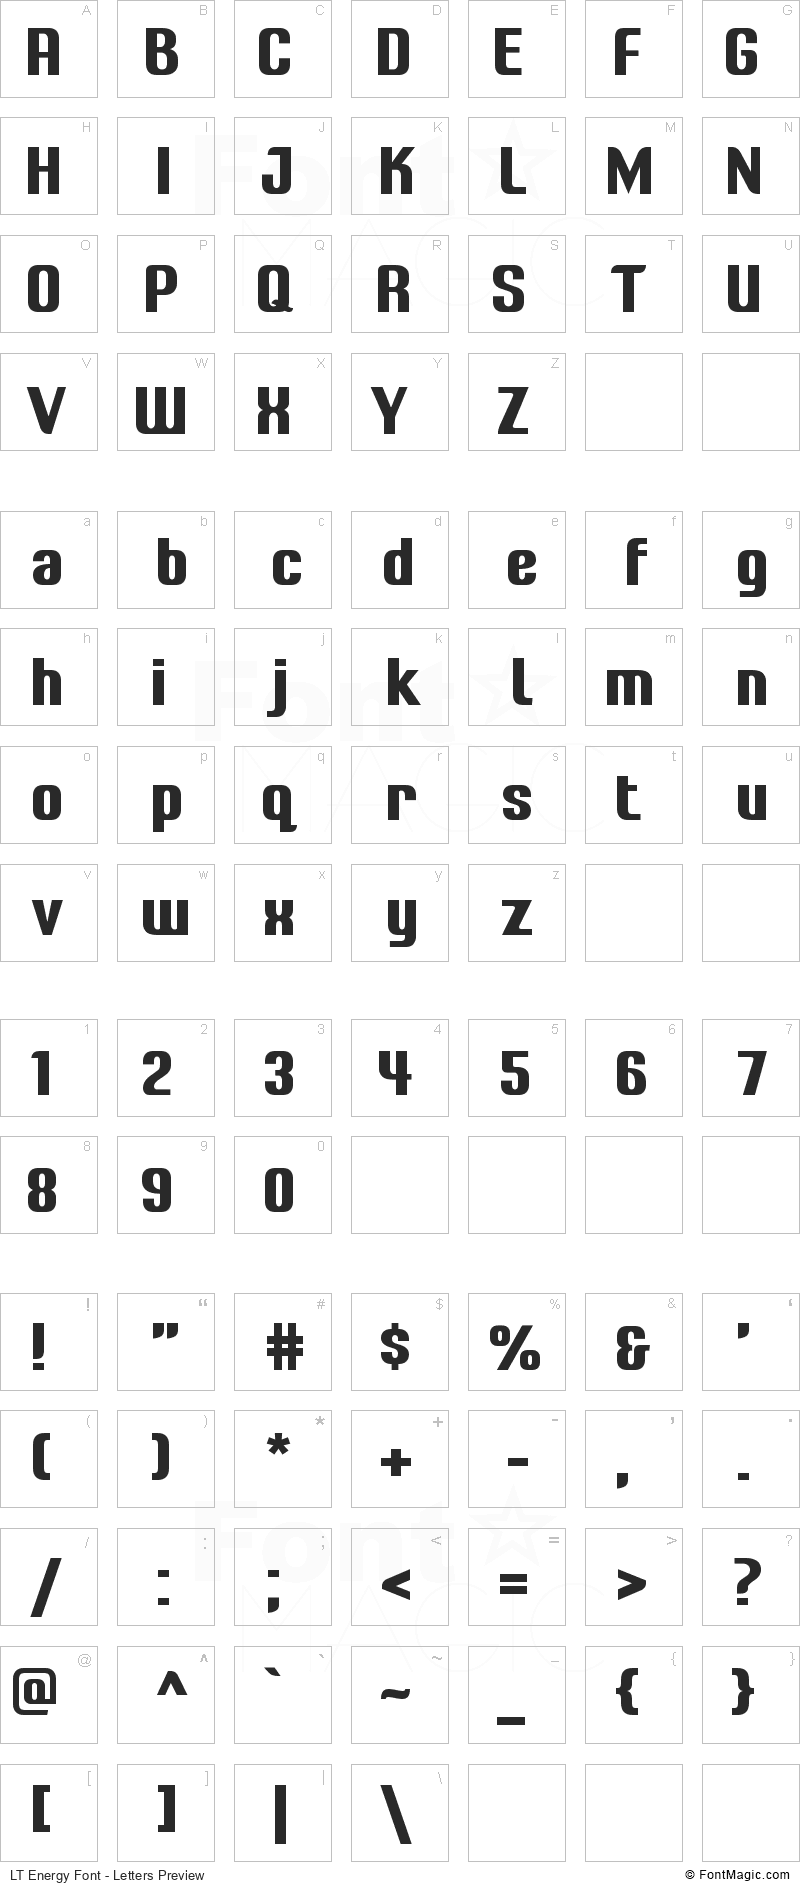 LT Energy Font - All Latters Preview Chart